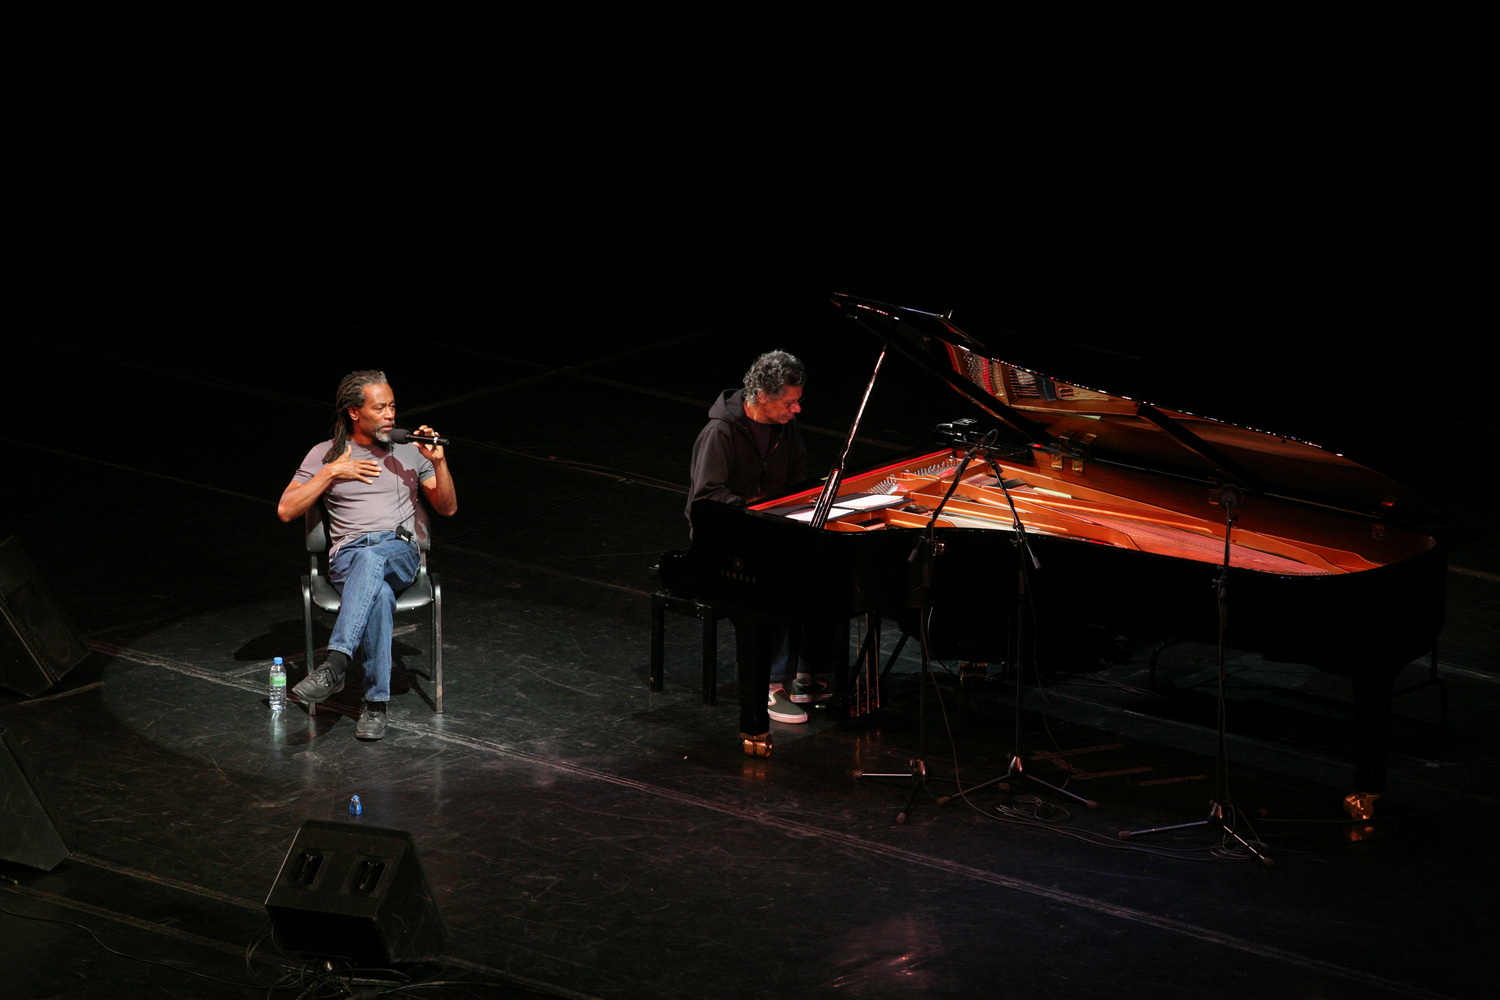 Mcferrin and Corea during their soundcheck